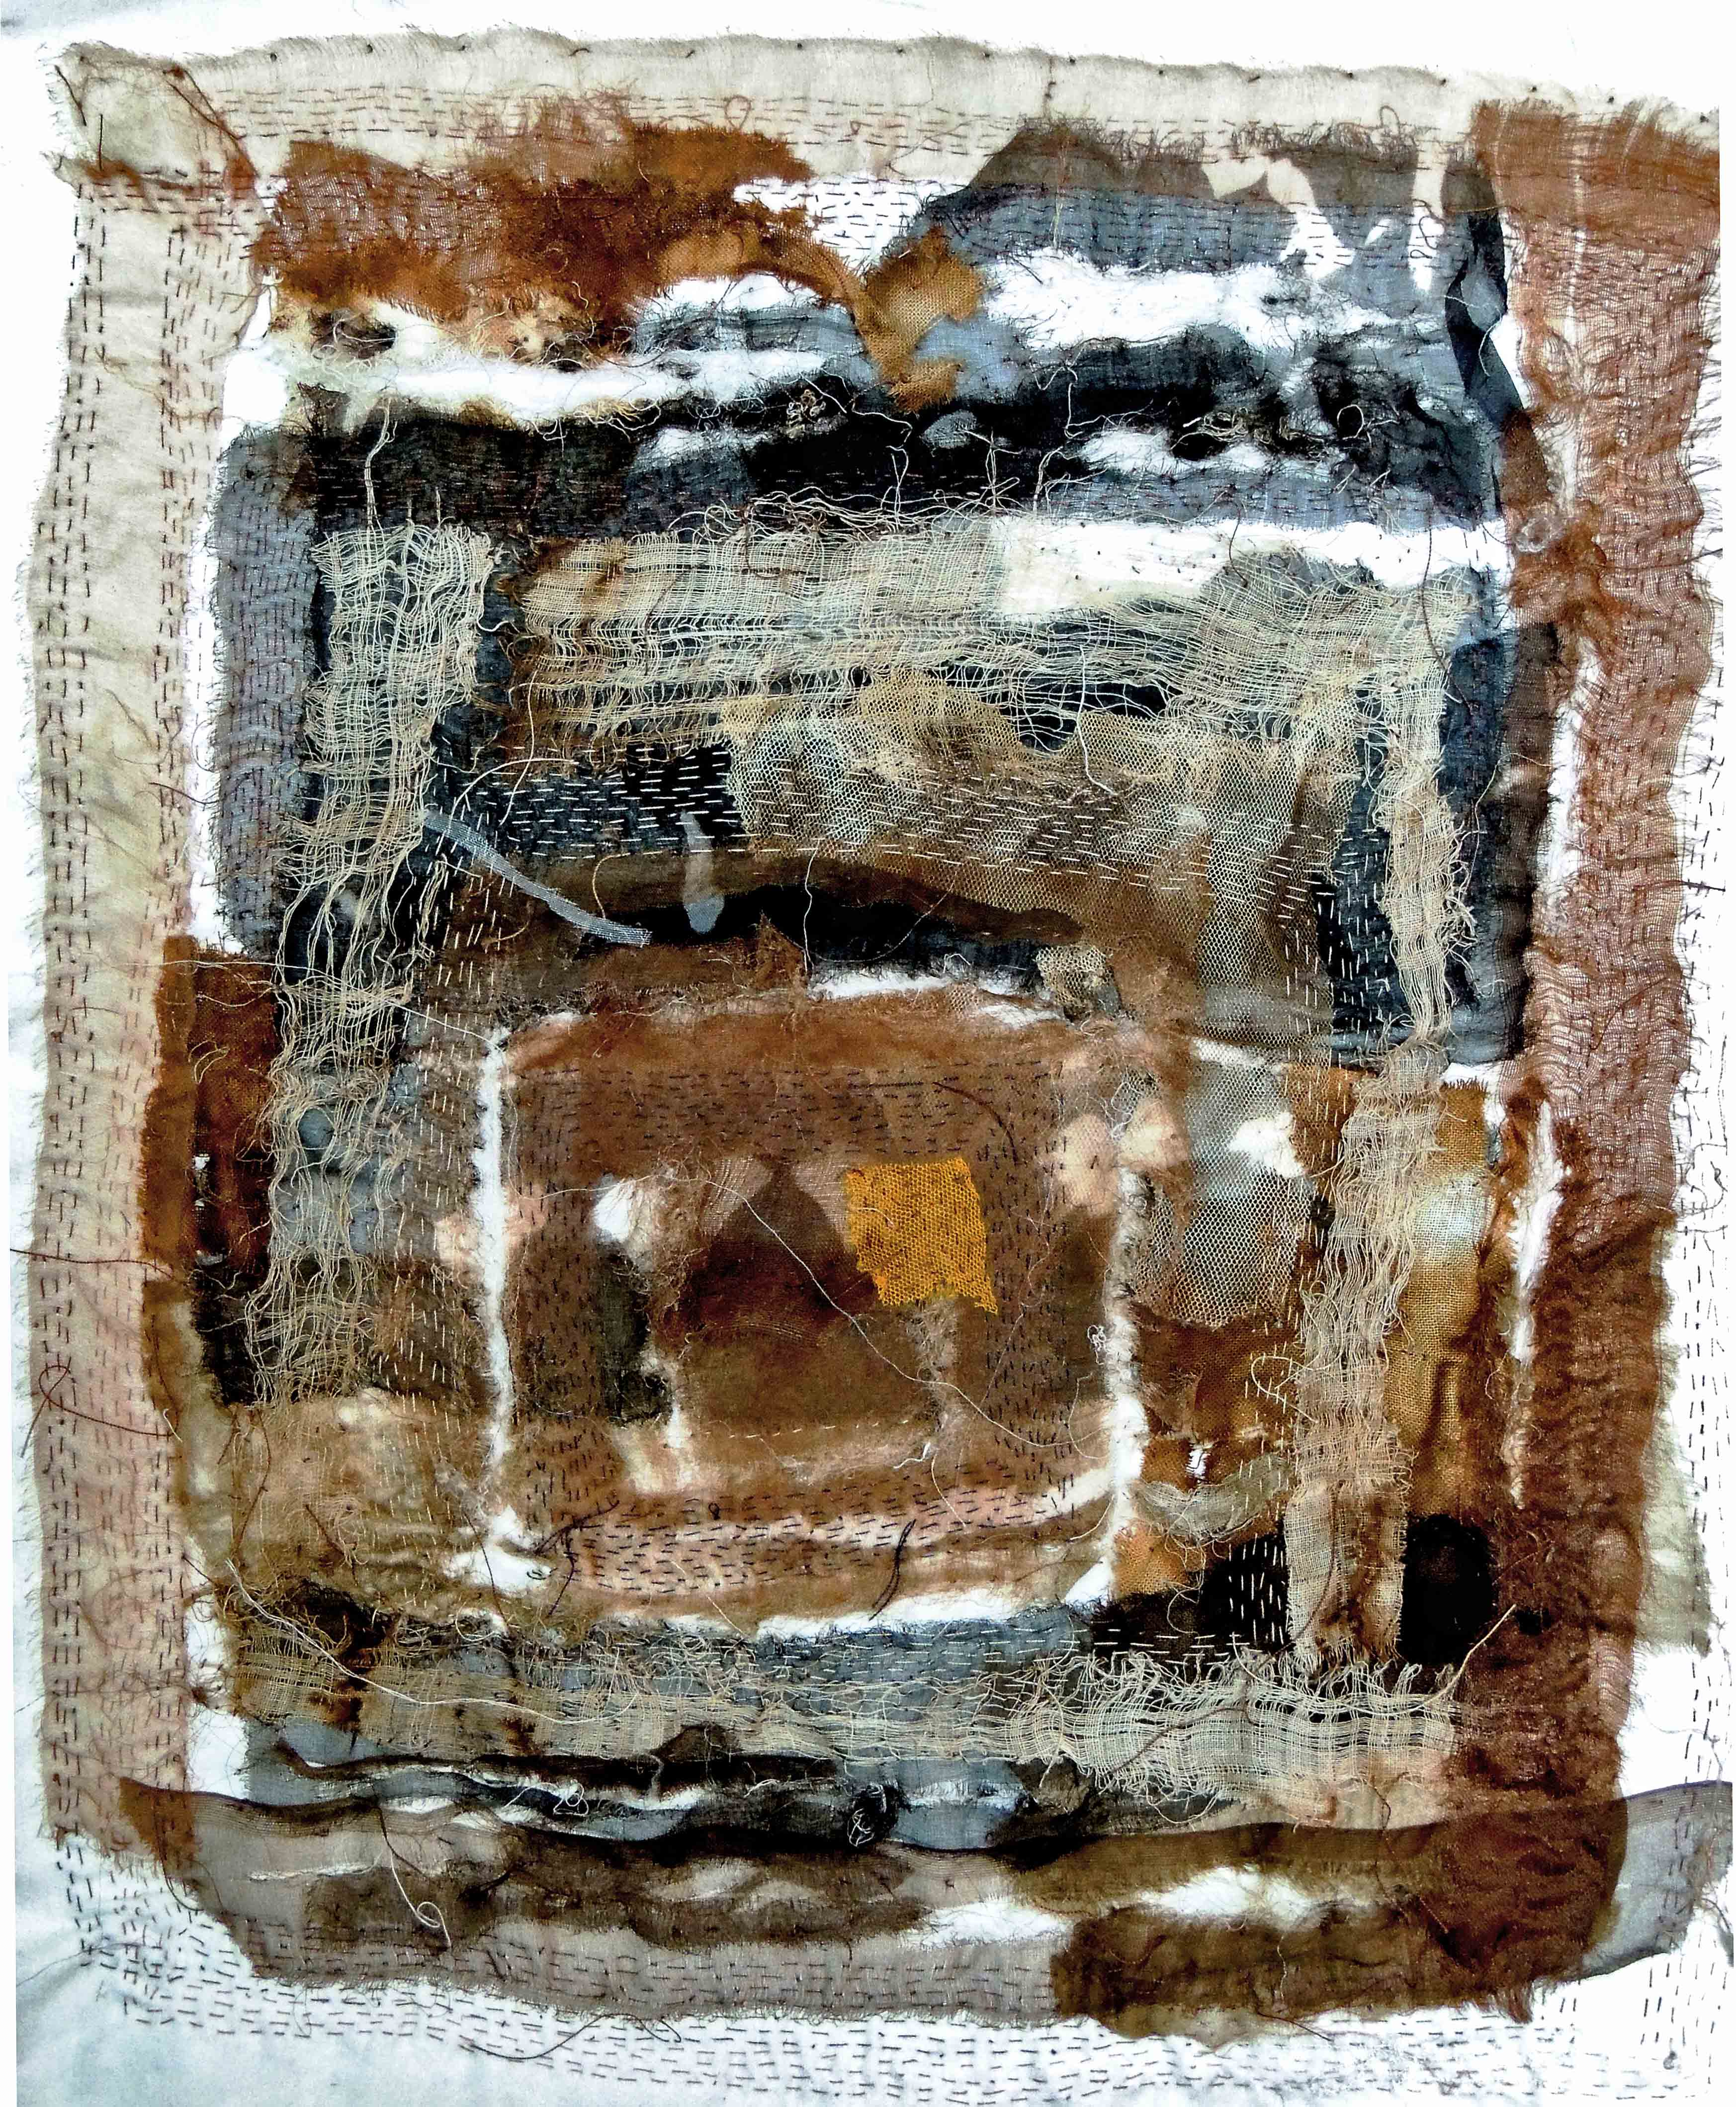 Mapping Mindstains, 2013 [15.5 x 17.75 inches - unframed] Material: cotton fabrics, nylon net, silk, cotton floss, cotton-polyester thread Technique: layering, tearing, pulling, stitching, staining with tea-leaves.